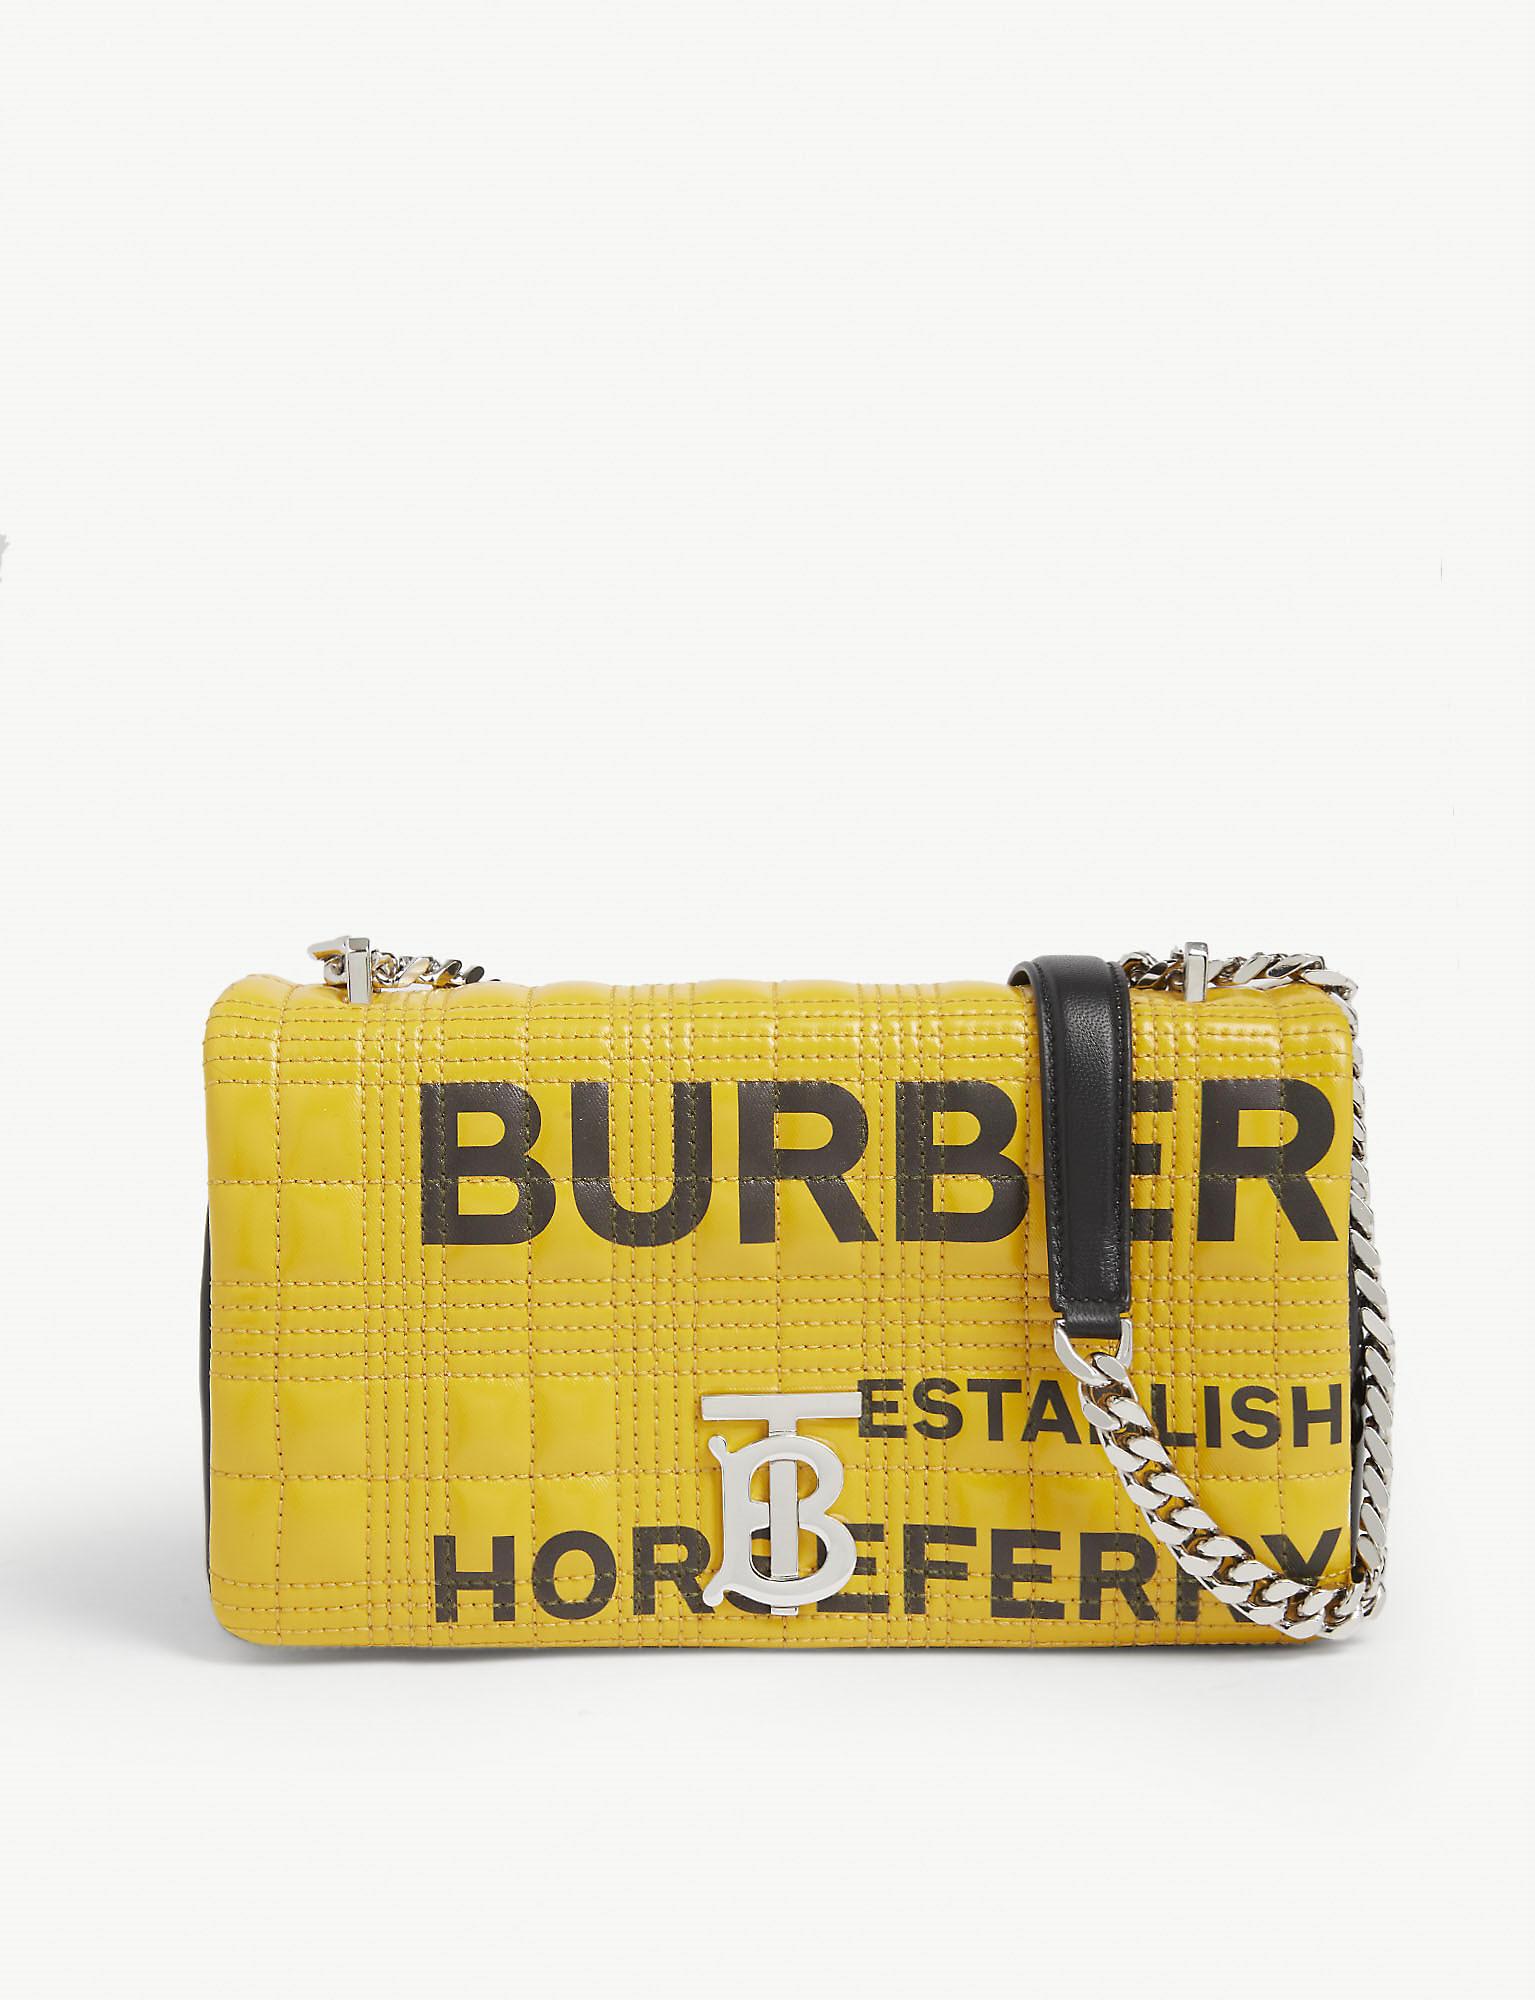 Burberry Lola Horseferry Print Quilted Check Crossbody Bag in Yellow | Lyst